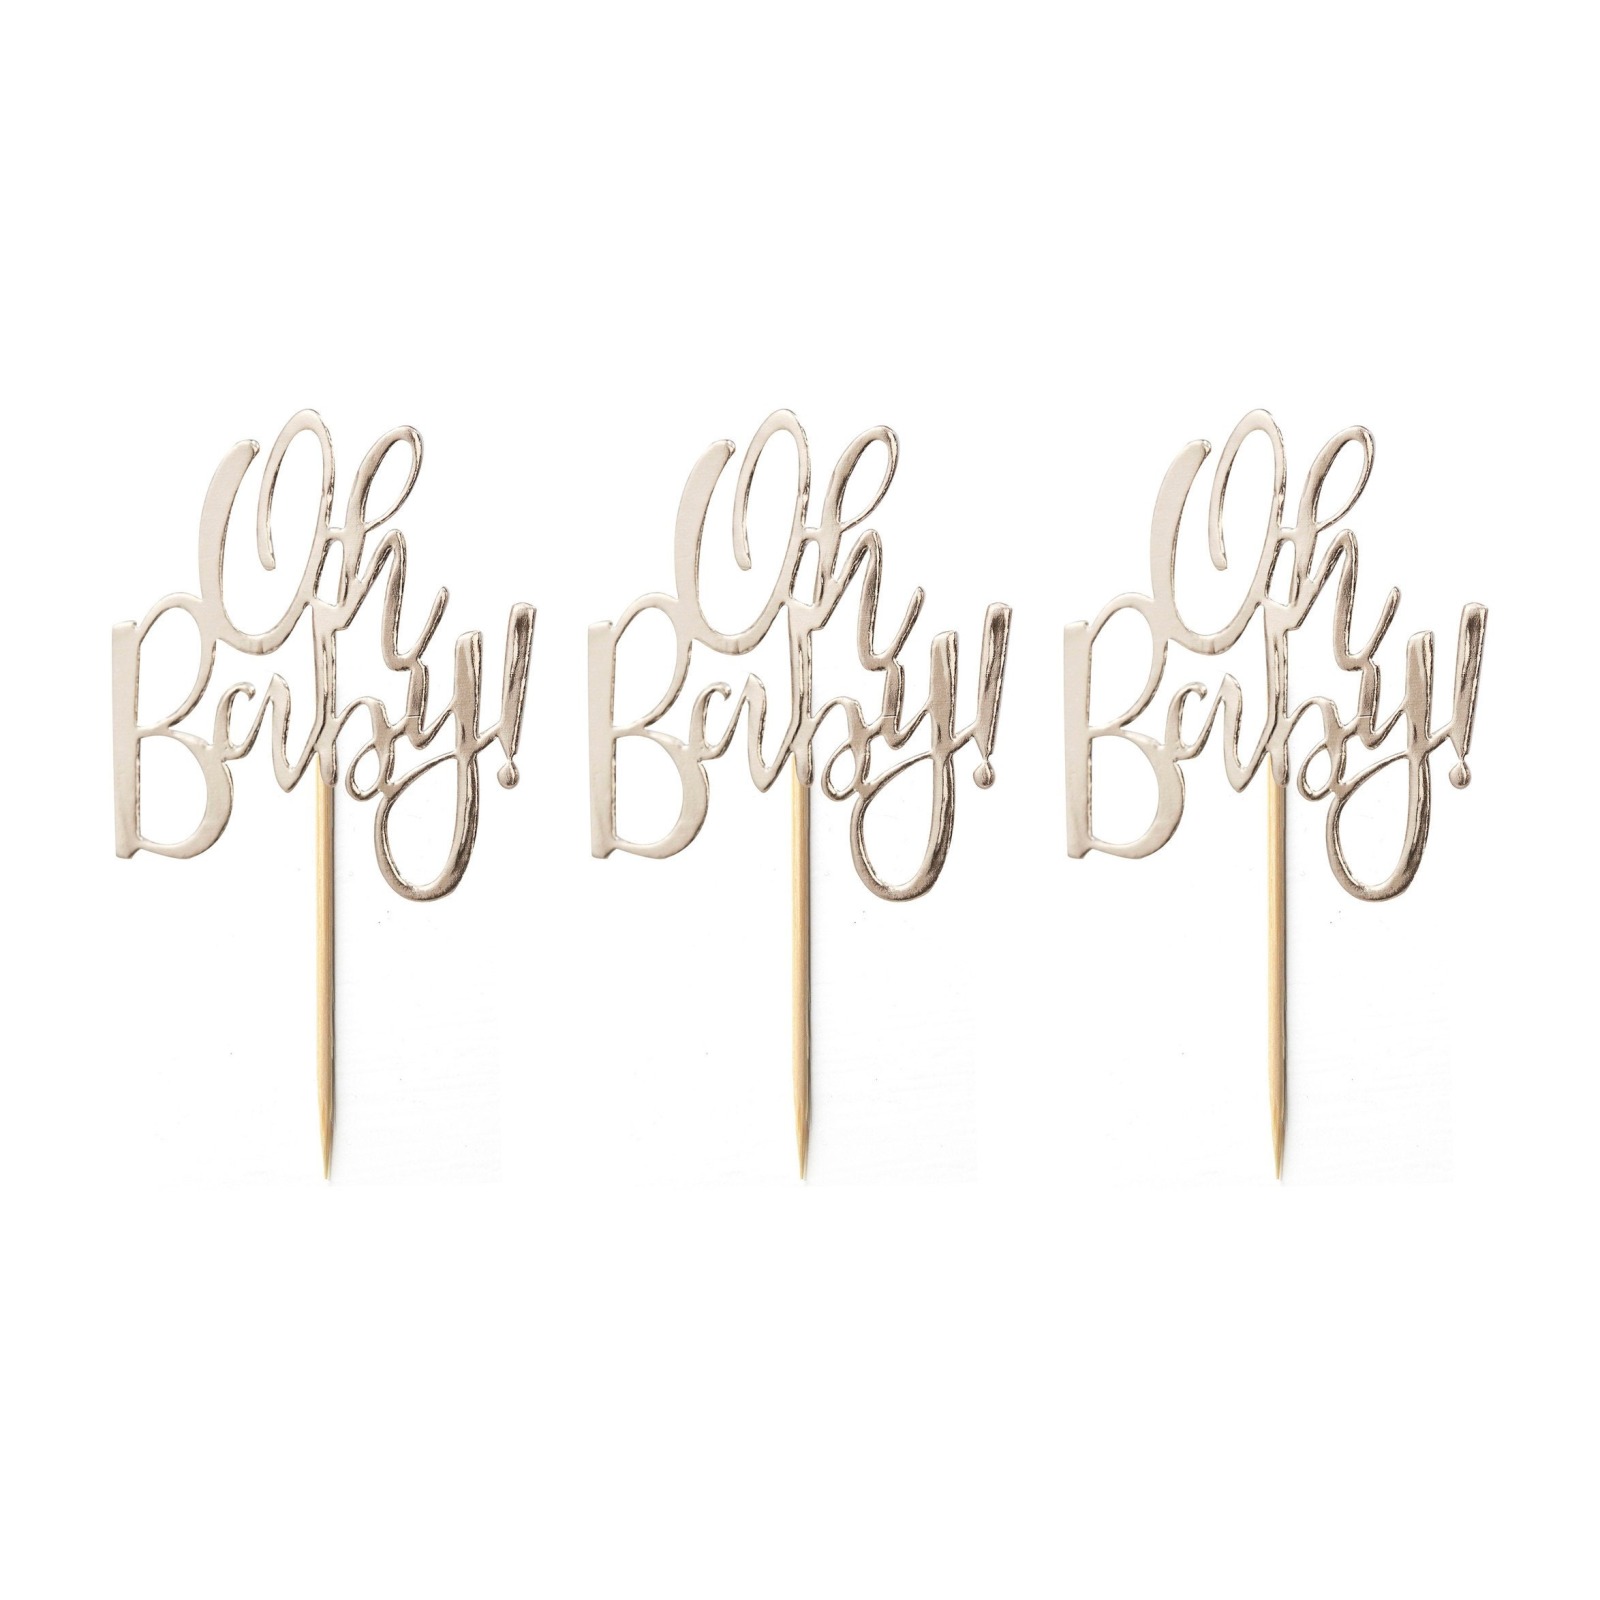 Oh Baby Cupcake Topper | 12 Cake-ToppernGoldfolie | 13,5 x 7cm | Baby Party Muffin Dekoration